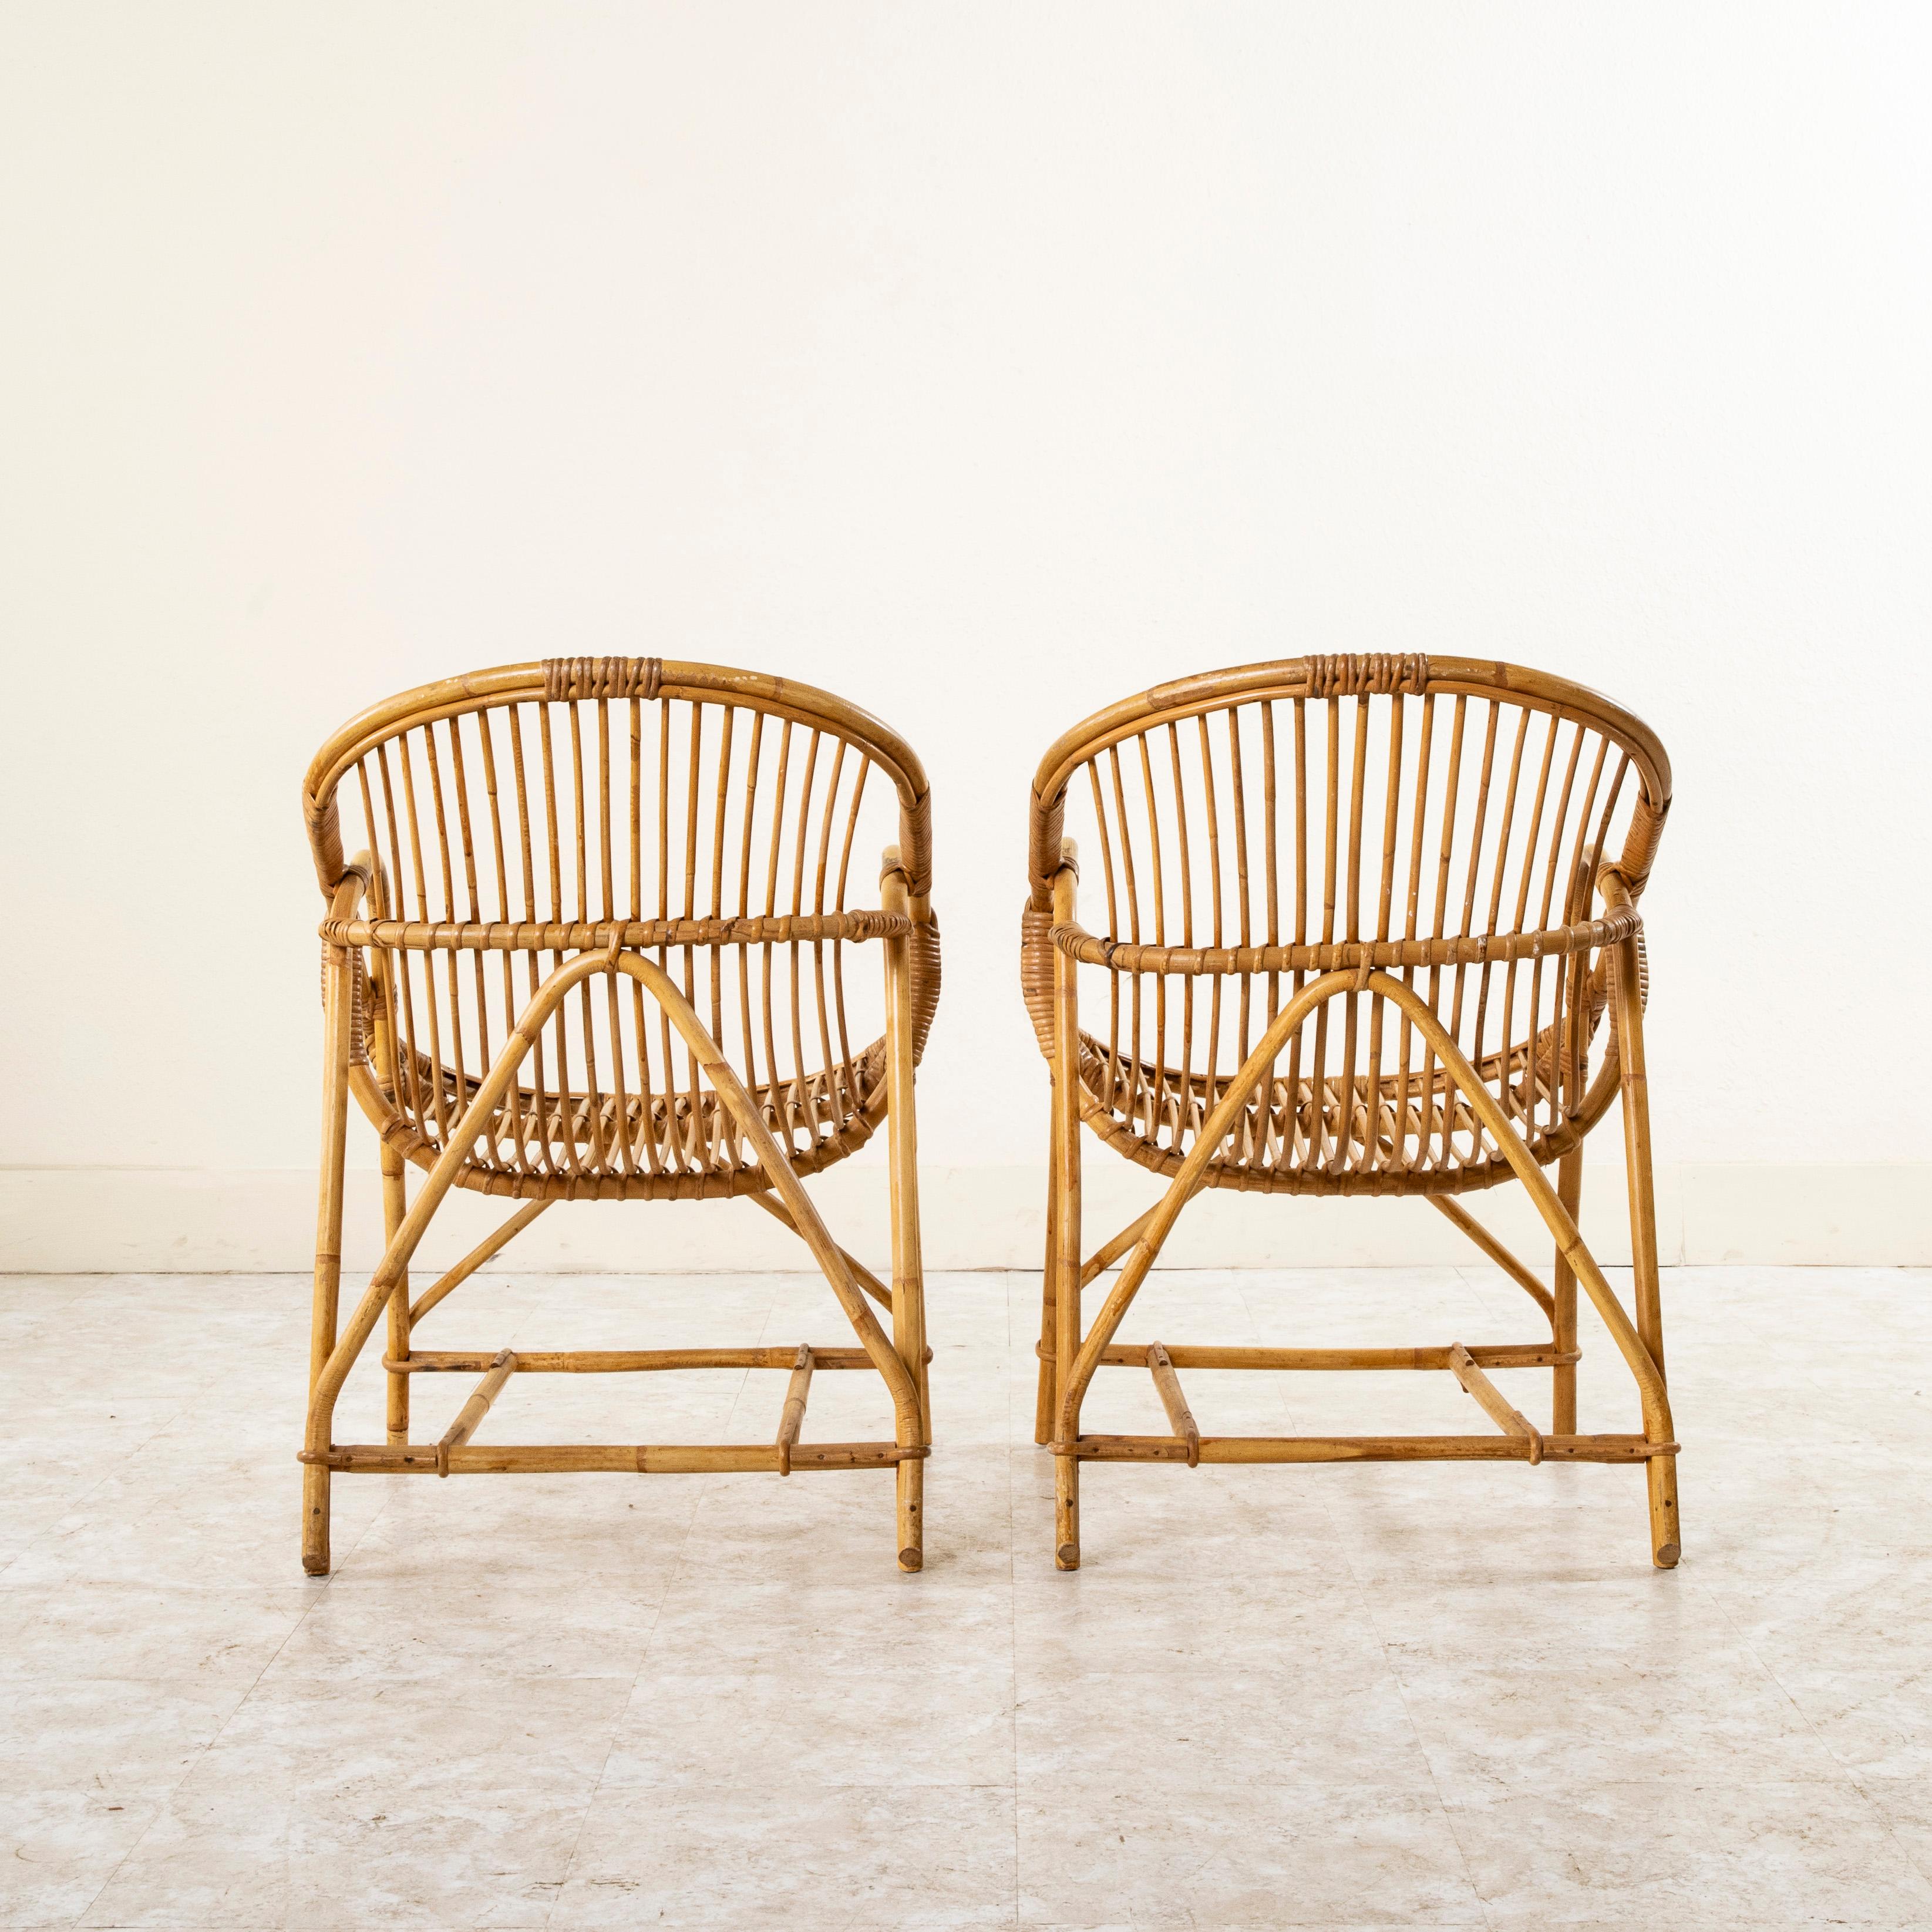 Pair of Mid-20th Century French Rattan Armchairs or Garden Chairs 1